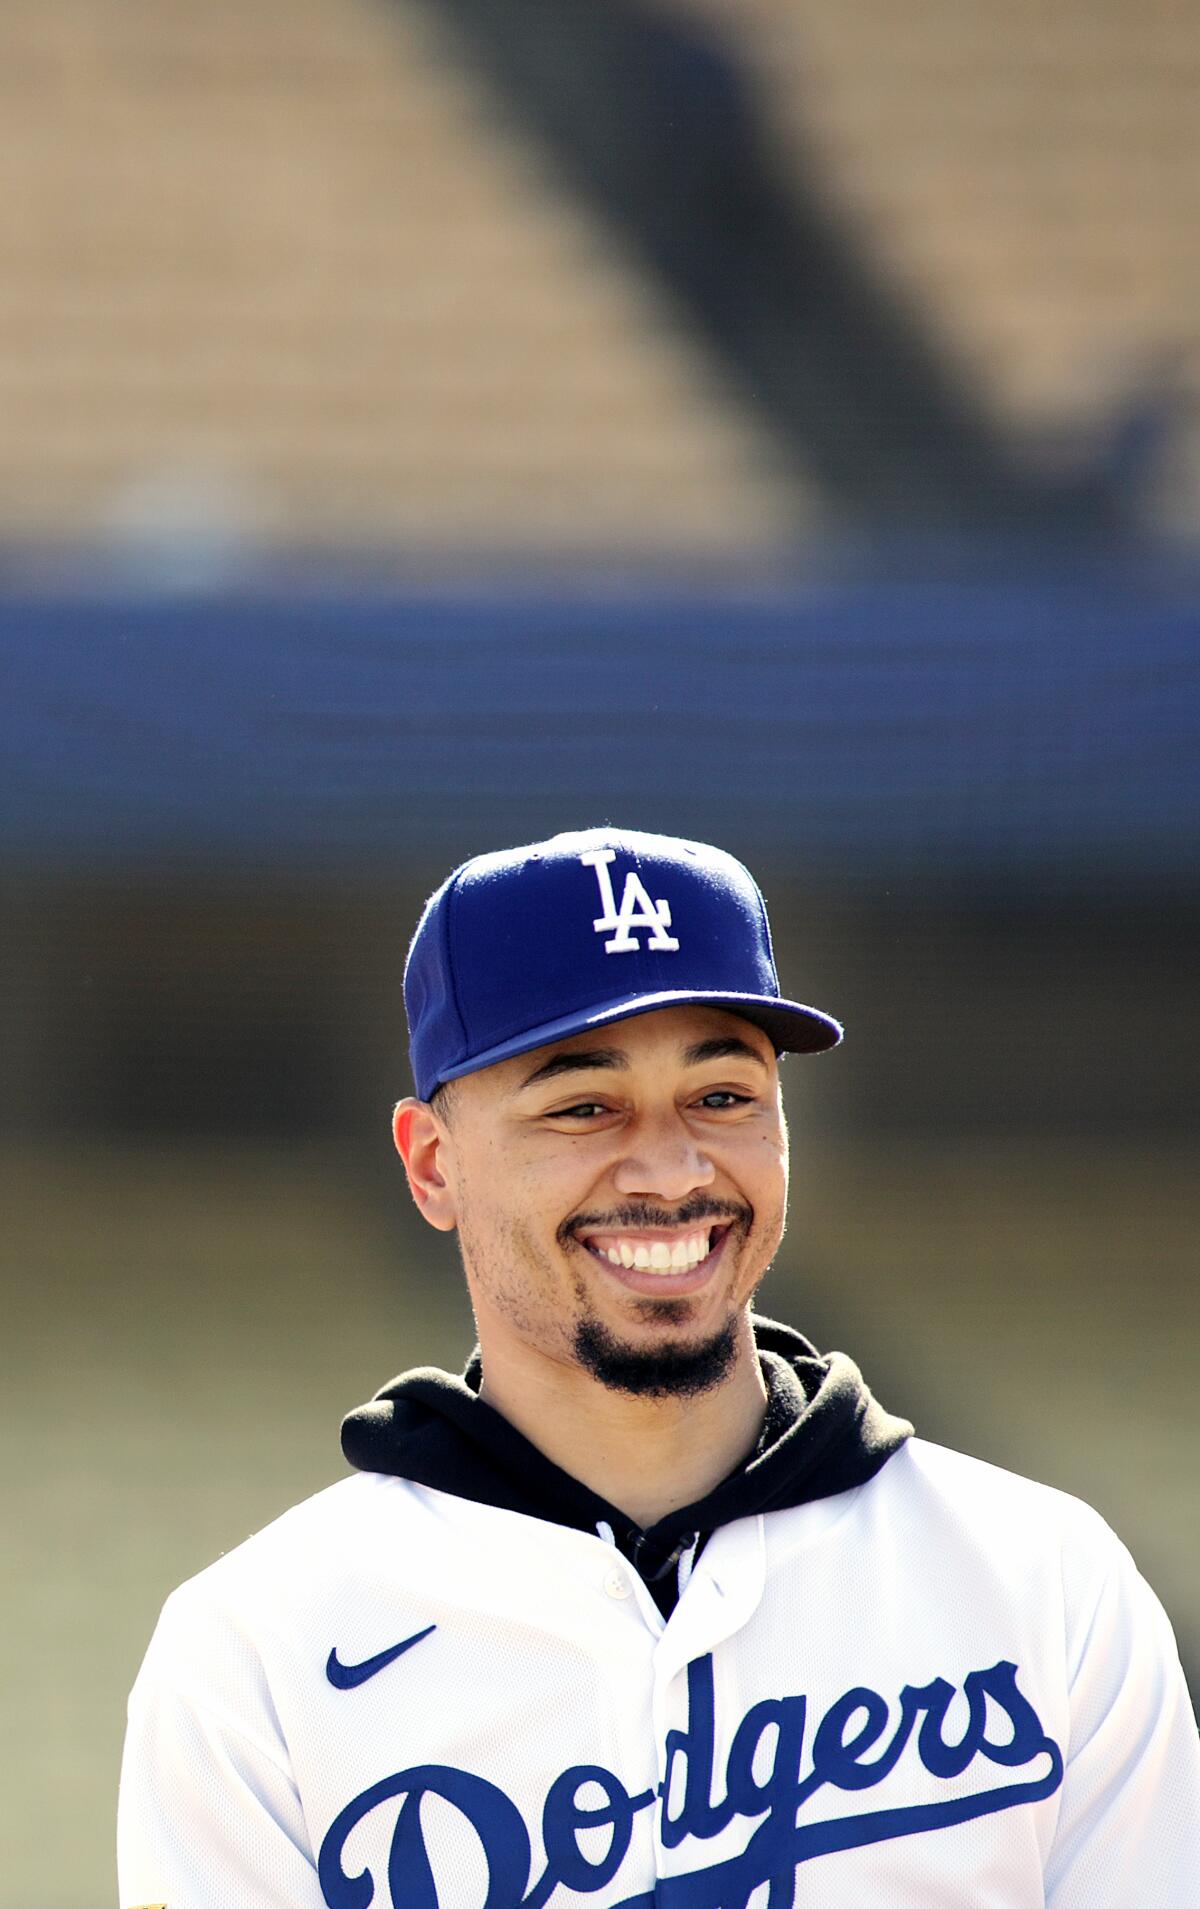 FOCO Releases Limited-Edition Mookie Betts Bobblehead For 2022 Dodgers  Opening Day